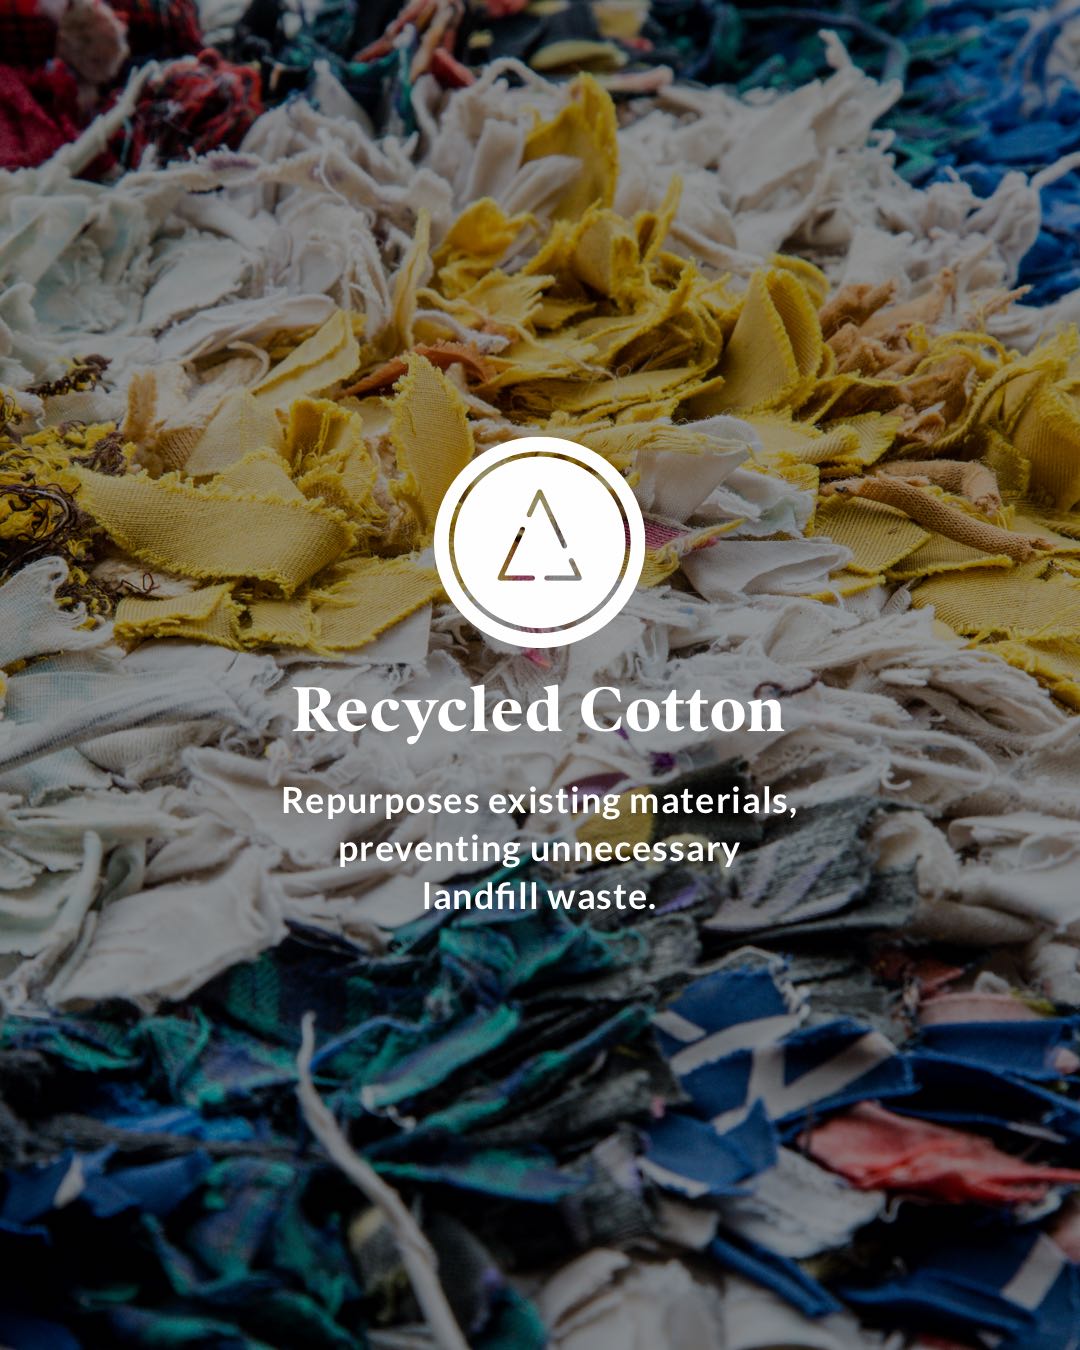 Recycled Cotton - Repurposes existing materials, preventing unnecessary landfill waste.